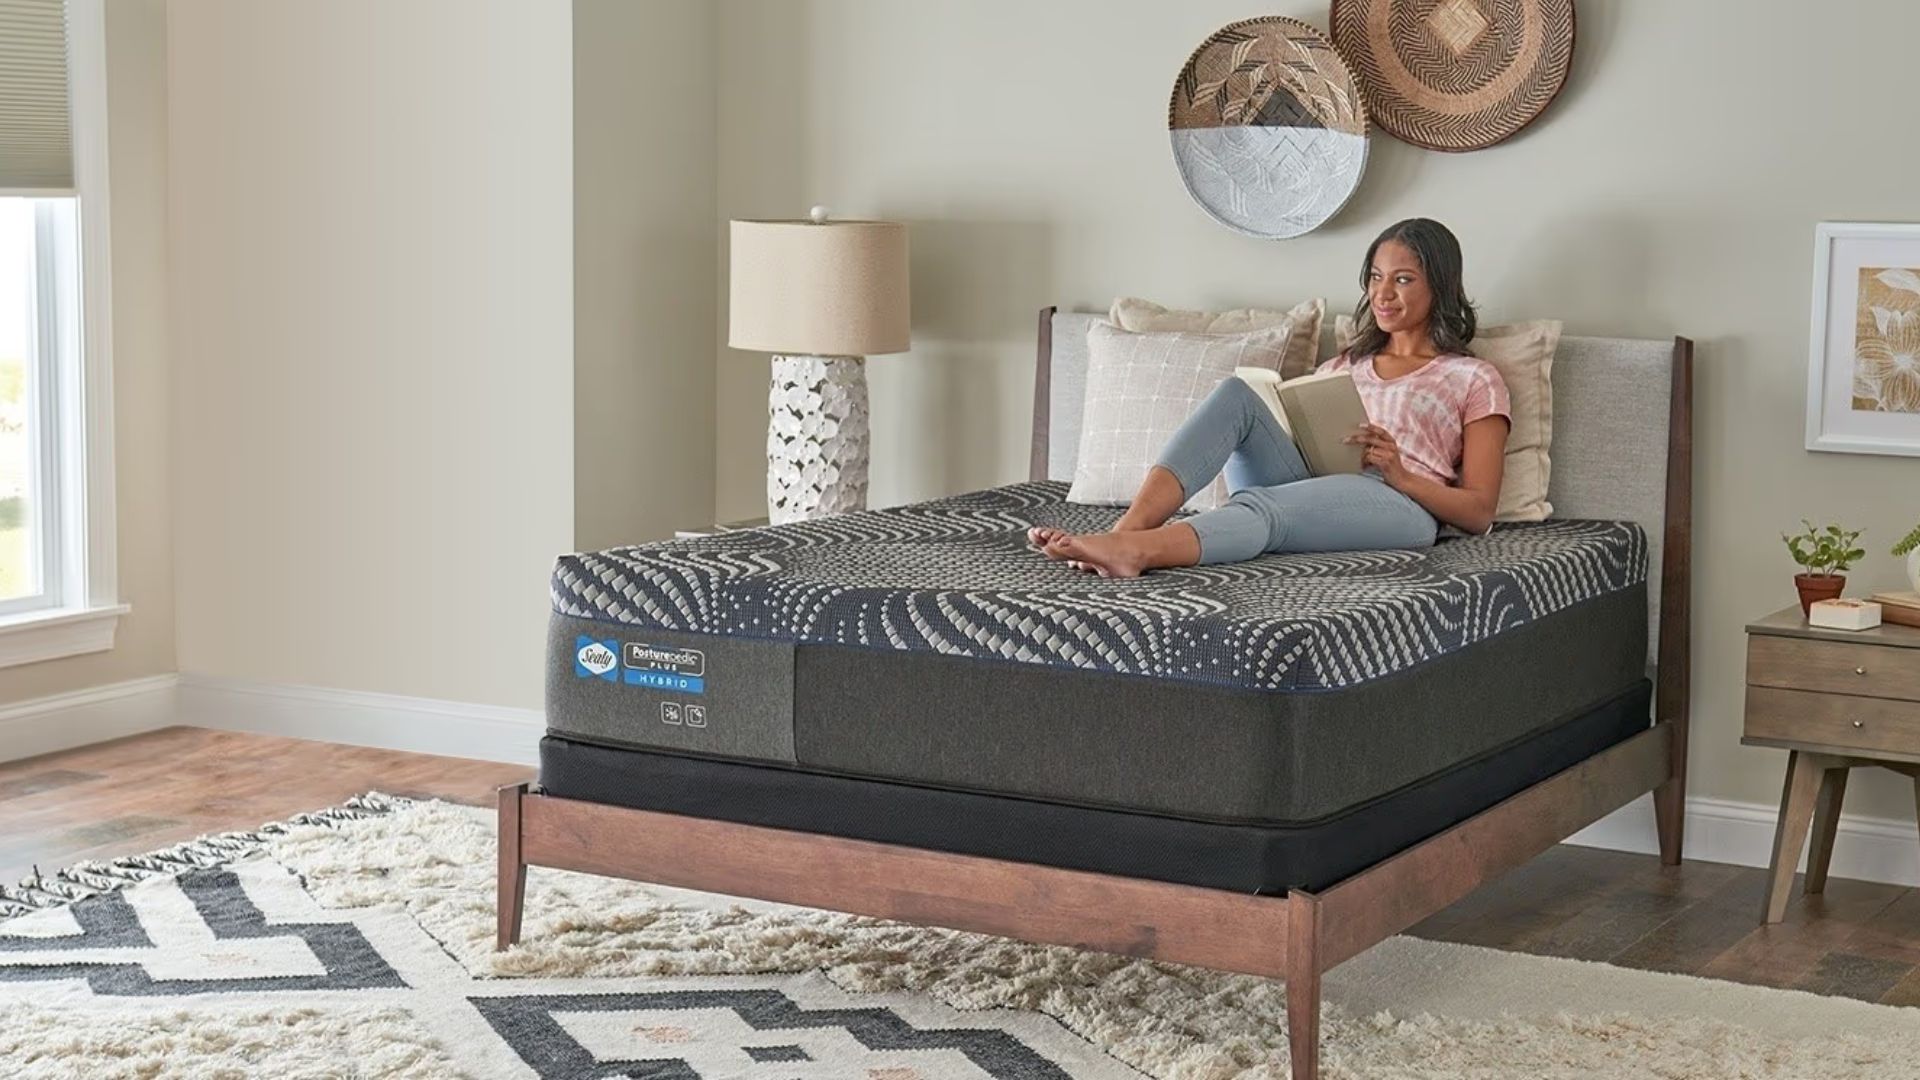 Woman relaxes on the Sealy Posturepedic Plus